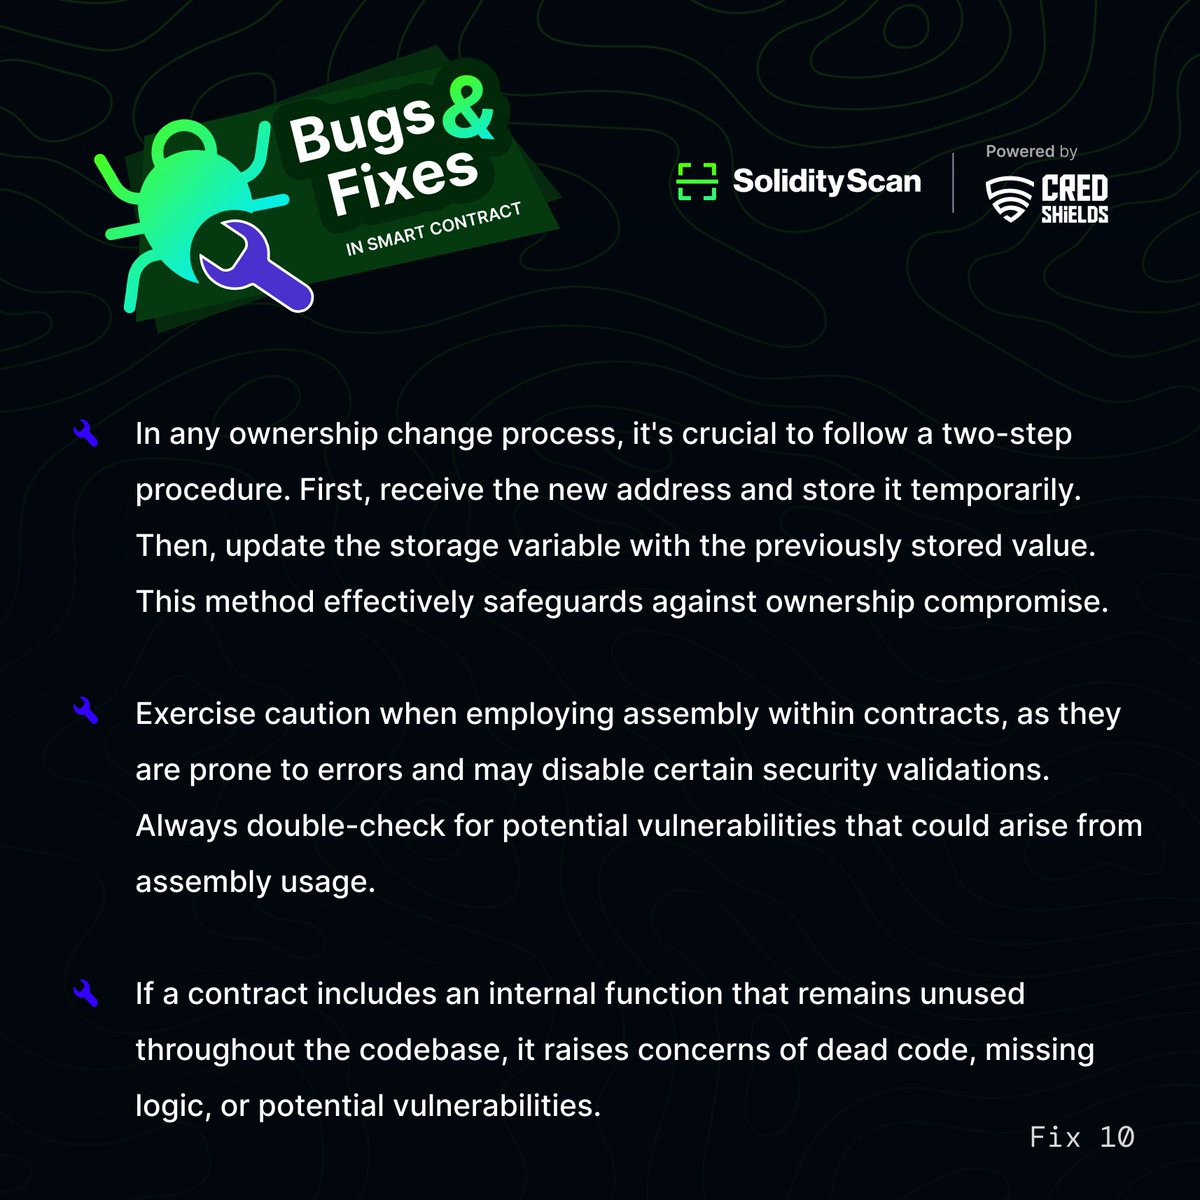 Bugs sneaking into your code? Time to fight back! Get ready for actionable fixes and strategies to fortify your codebase. #BugHunt #CyberSecurity #Web3